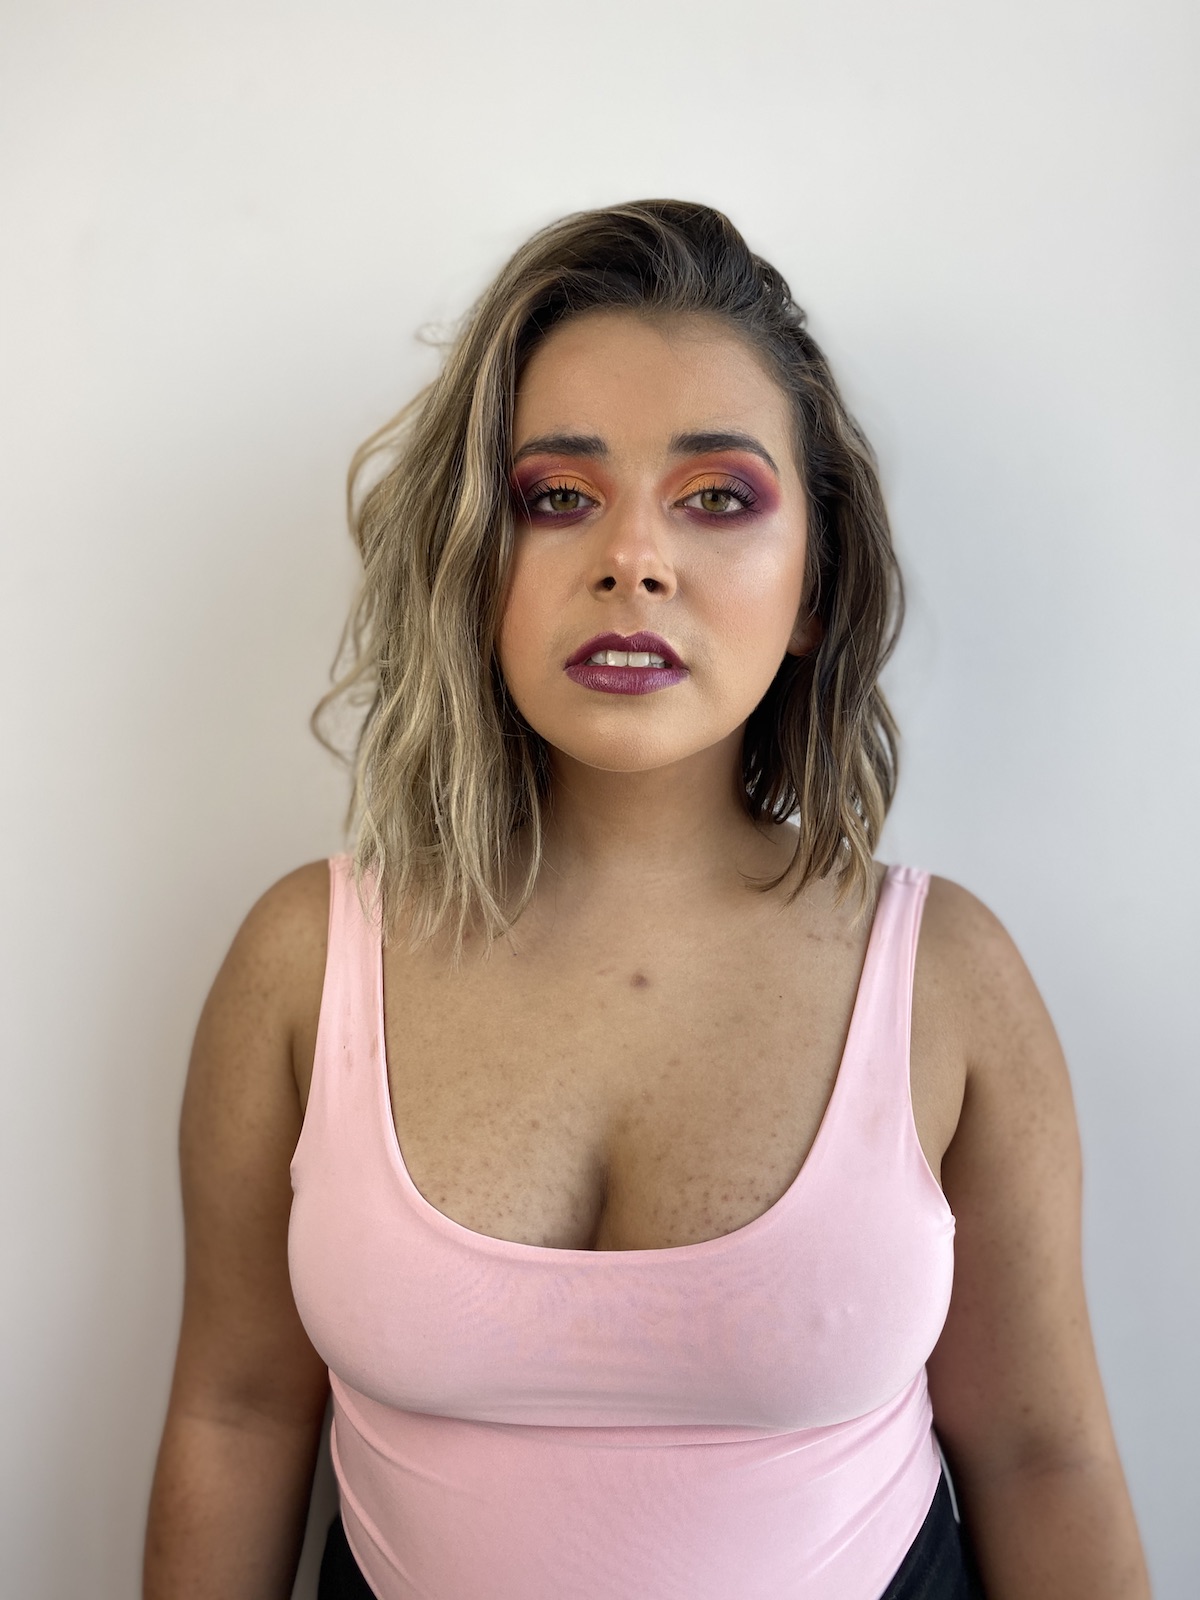 The author, Olivia Zayas Ryan, stares directly at the camera with a full face of dramatic makeup in a magenta and orange color scheme. Her expression is neutral.